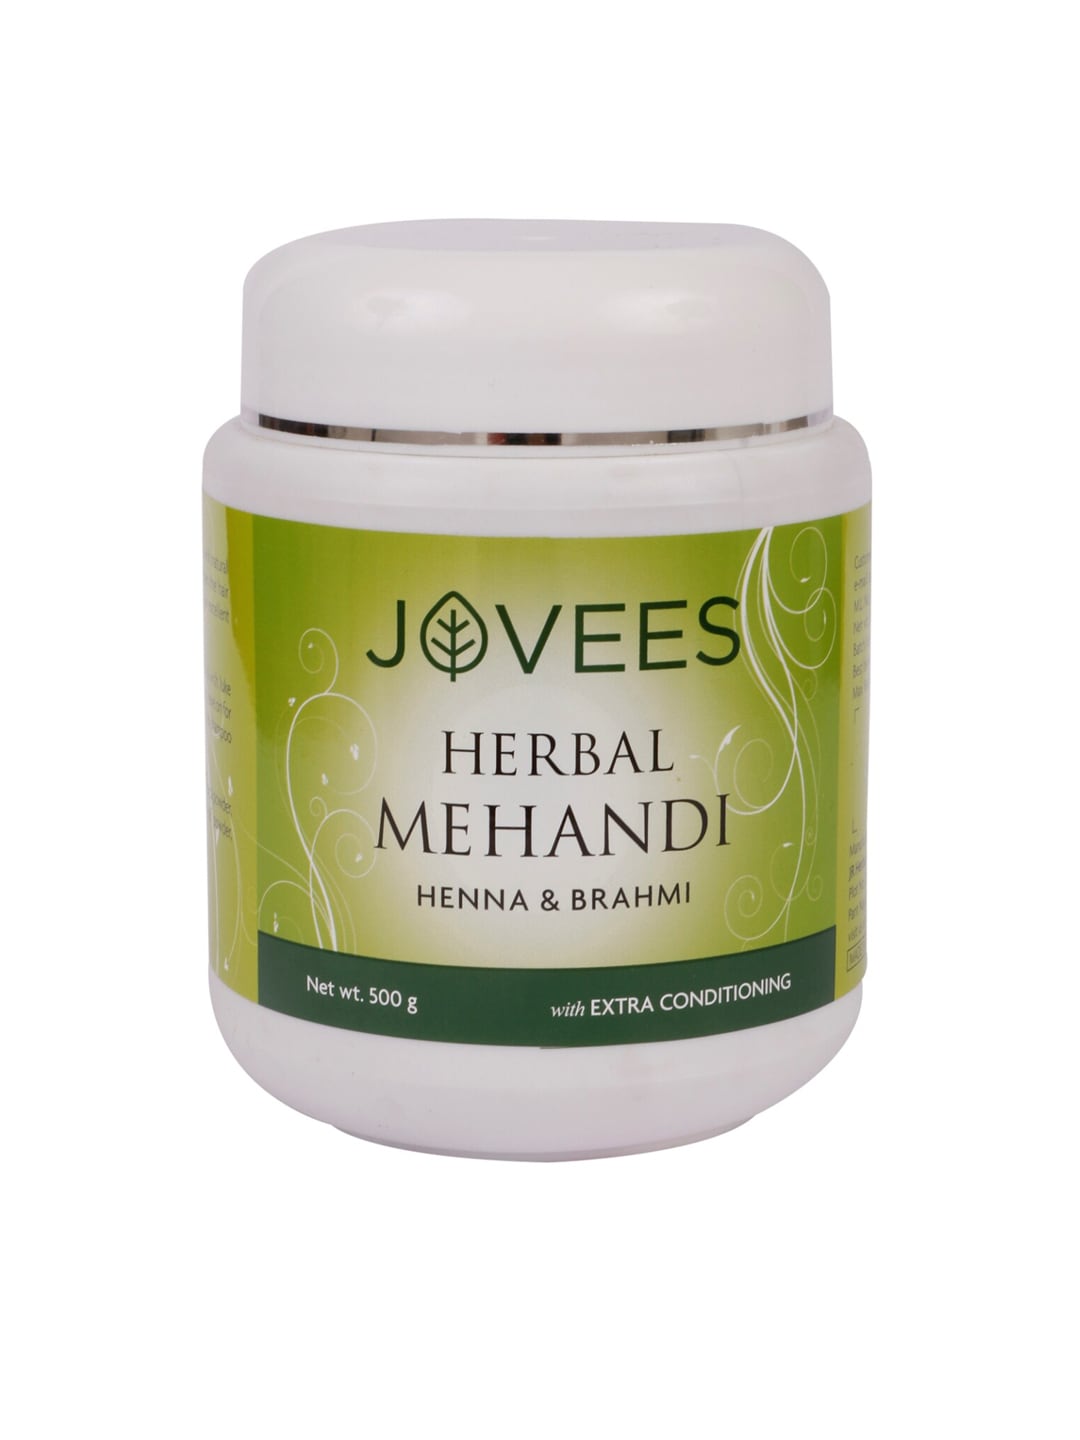 Jovees Herbal Mehandi with Henna & Brahmi for Extra Conditioning - 500 g Price in India